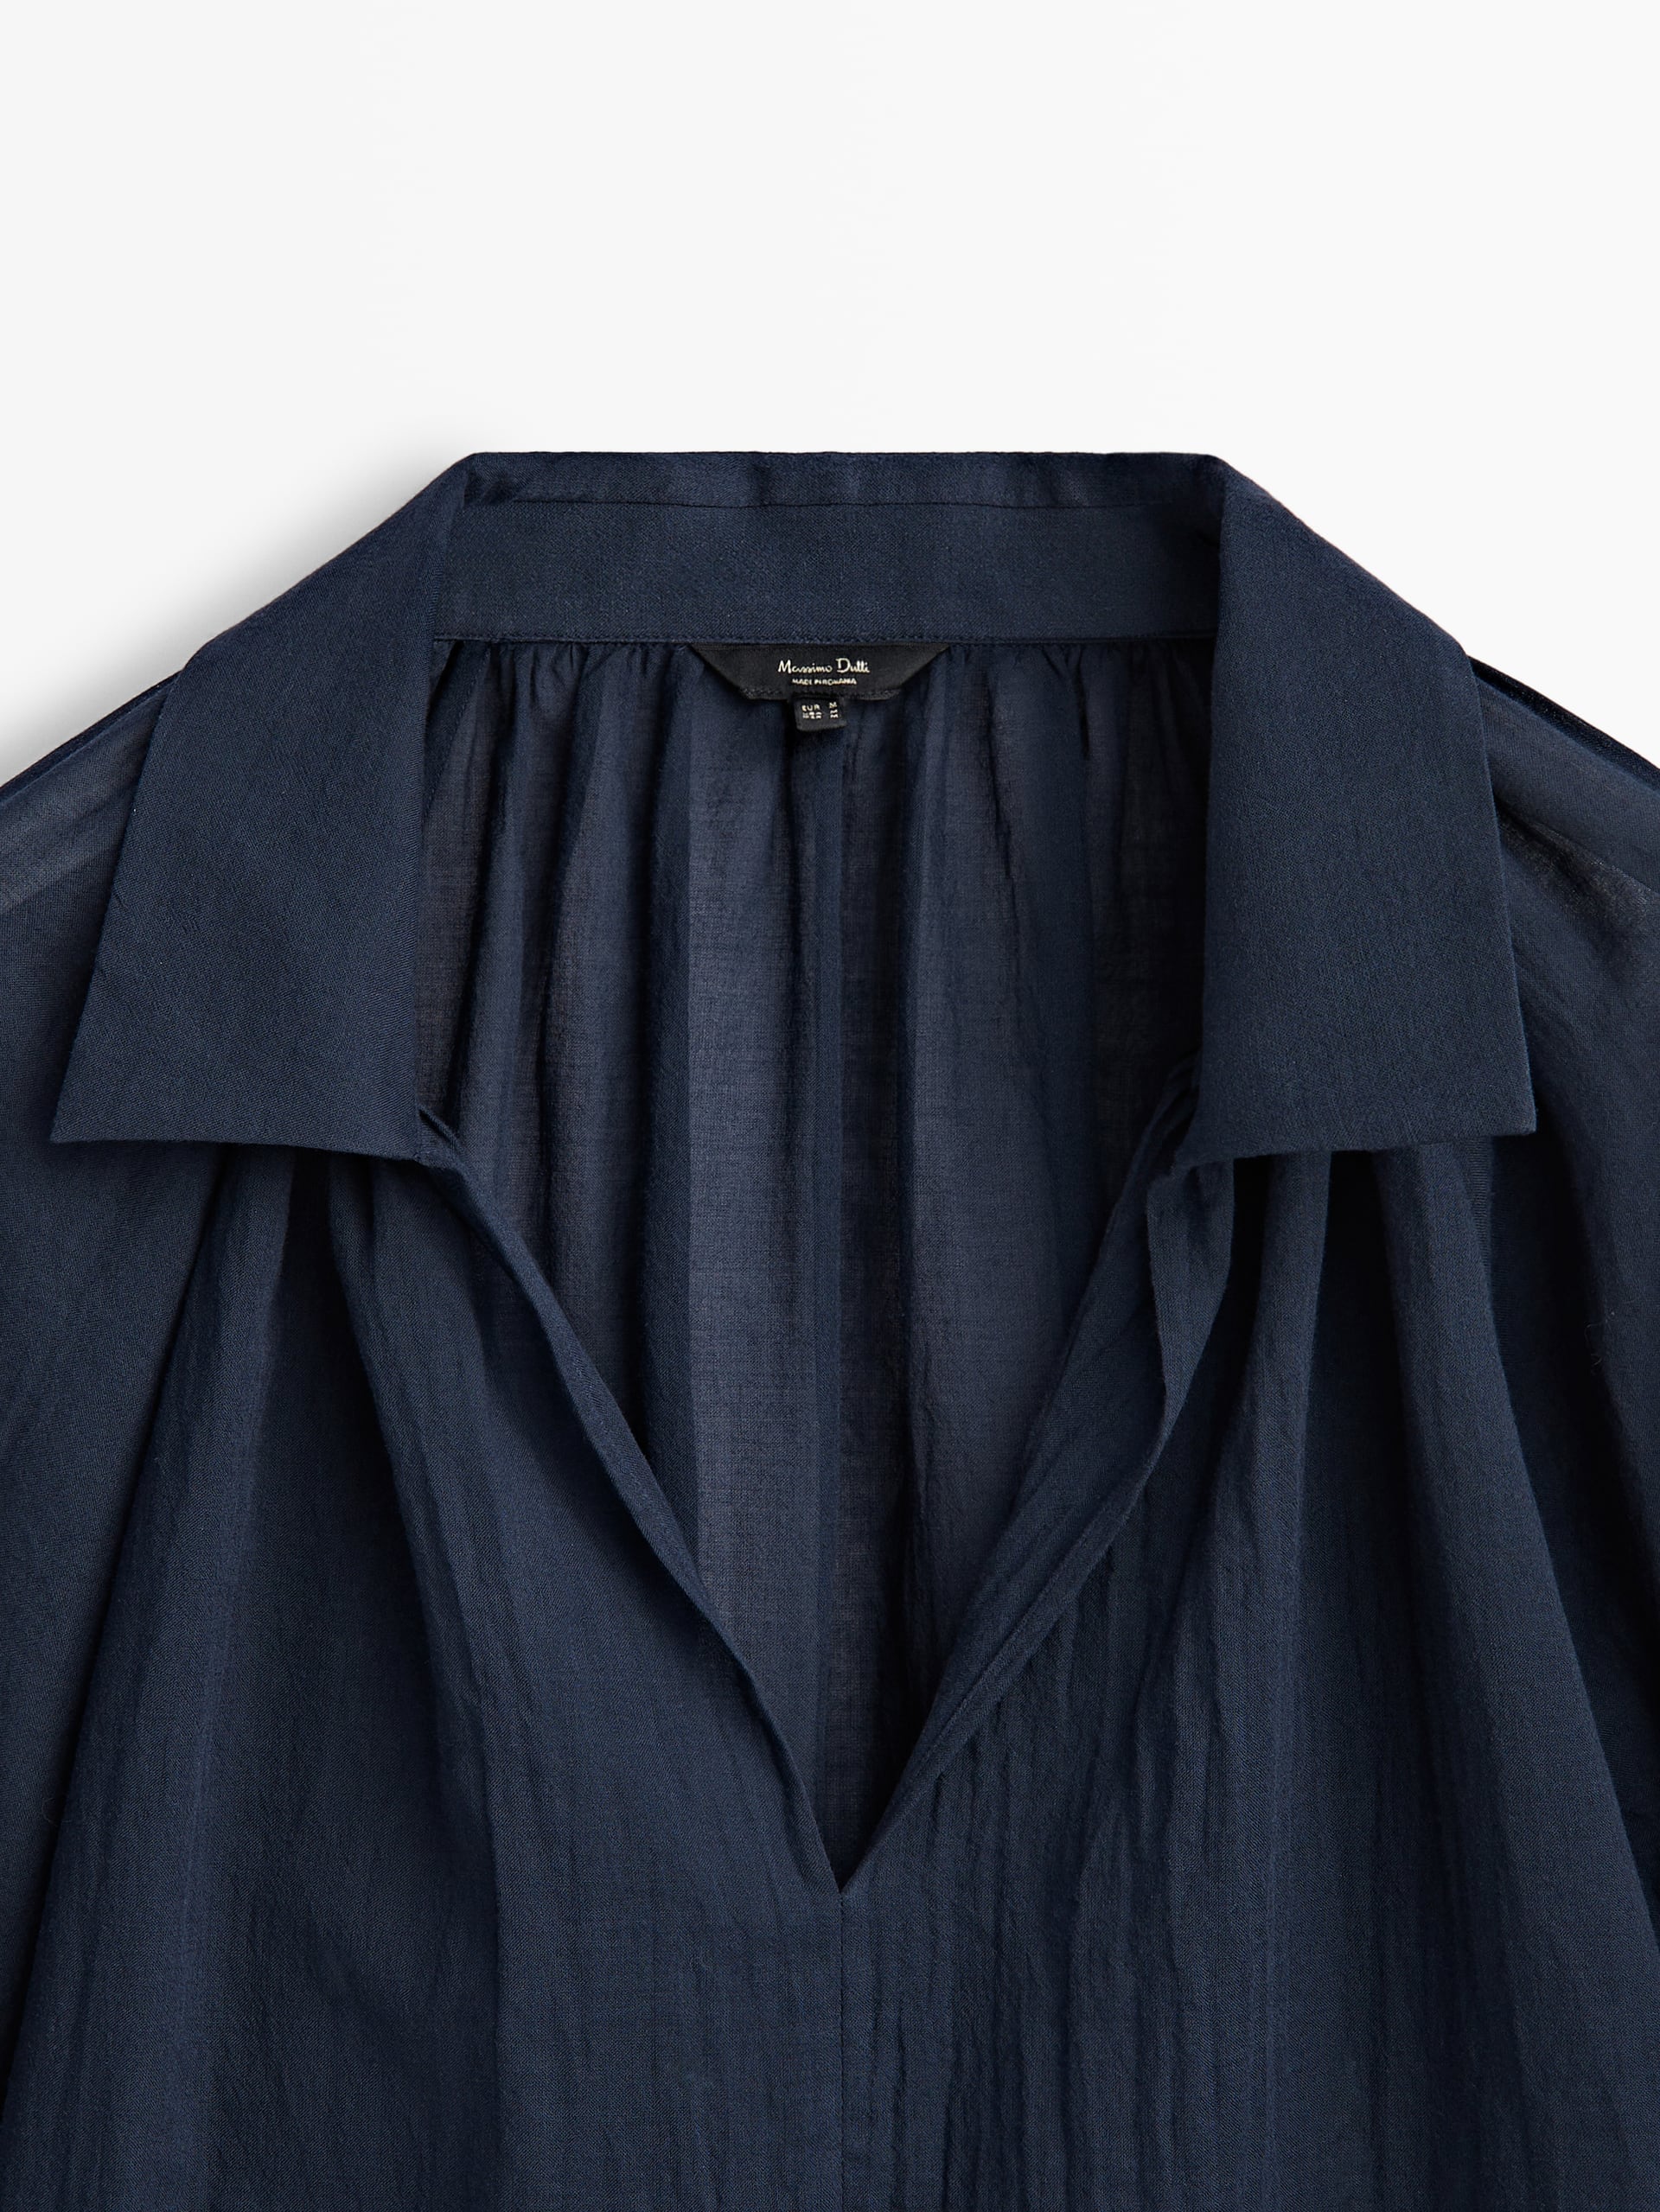 Cotton voile blouse with gathered details - Navy blue | ZARA United States